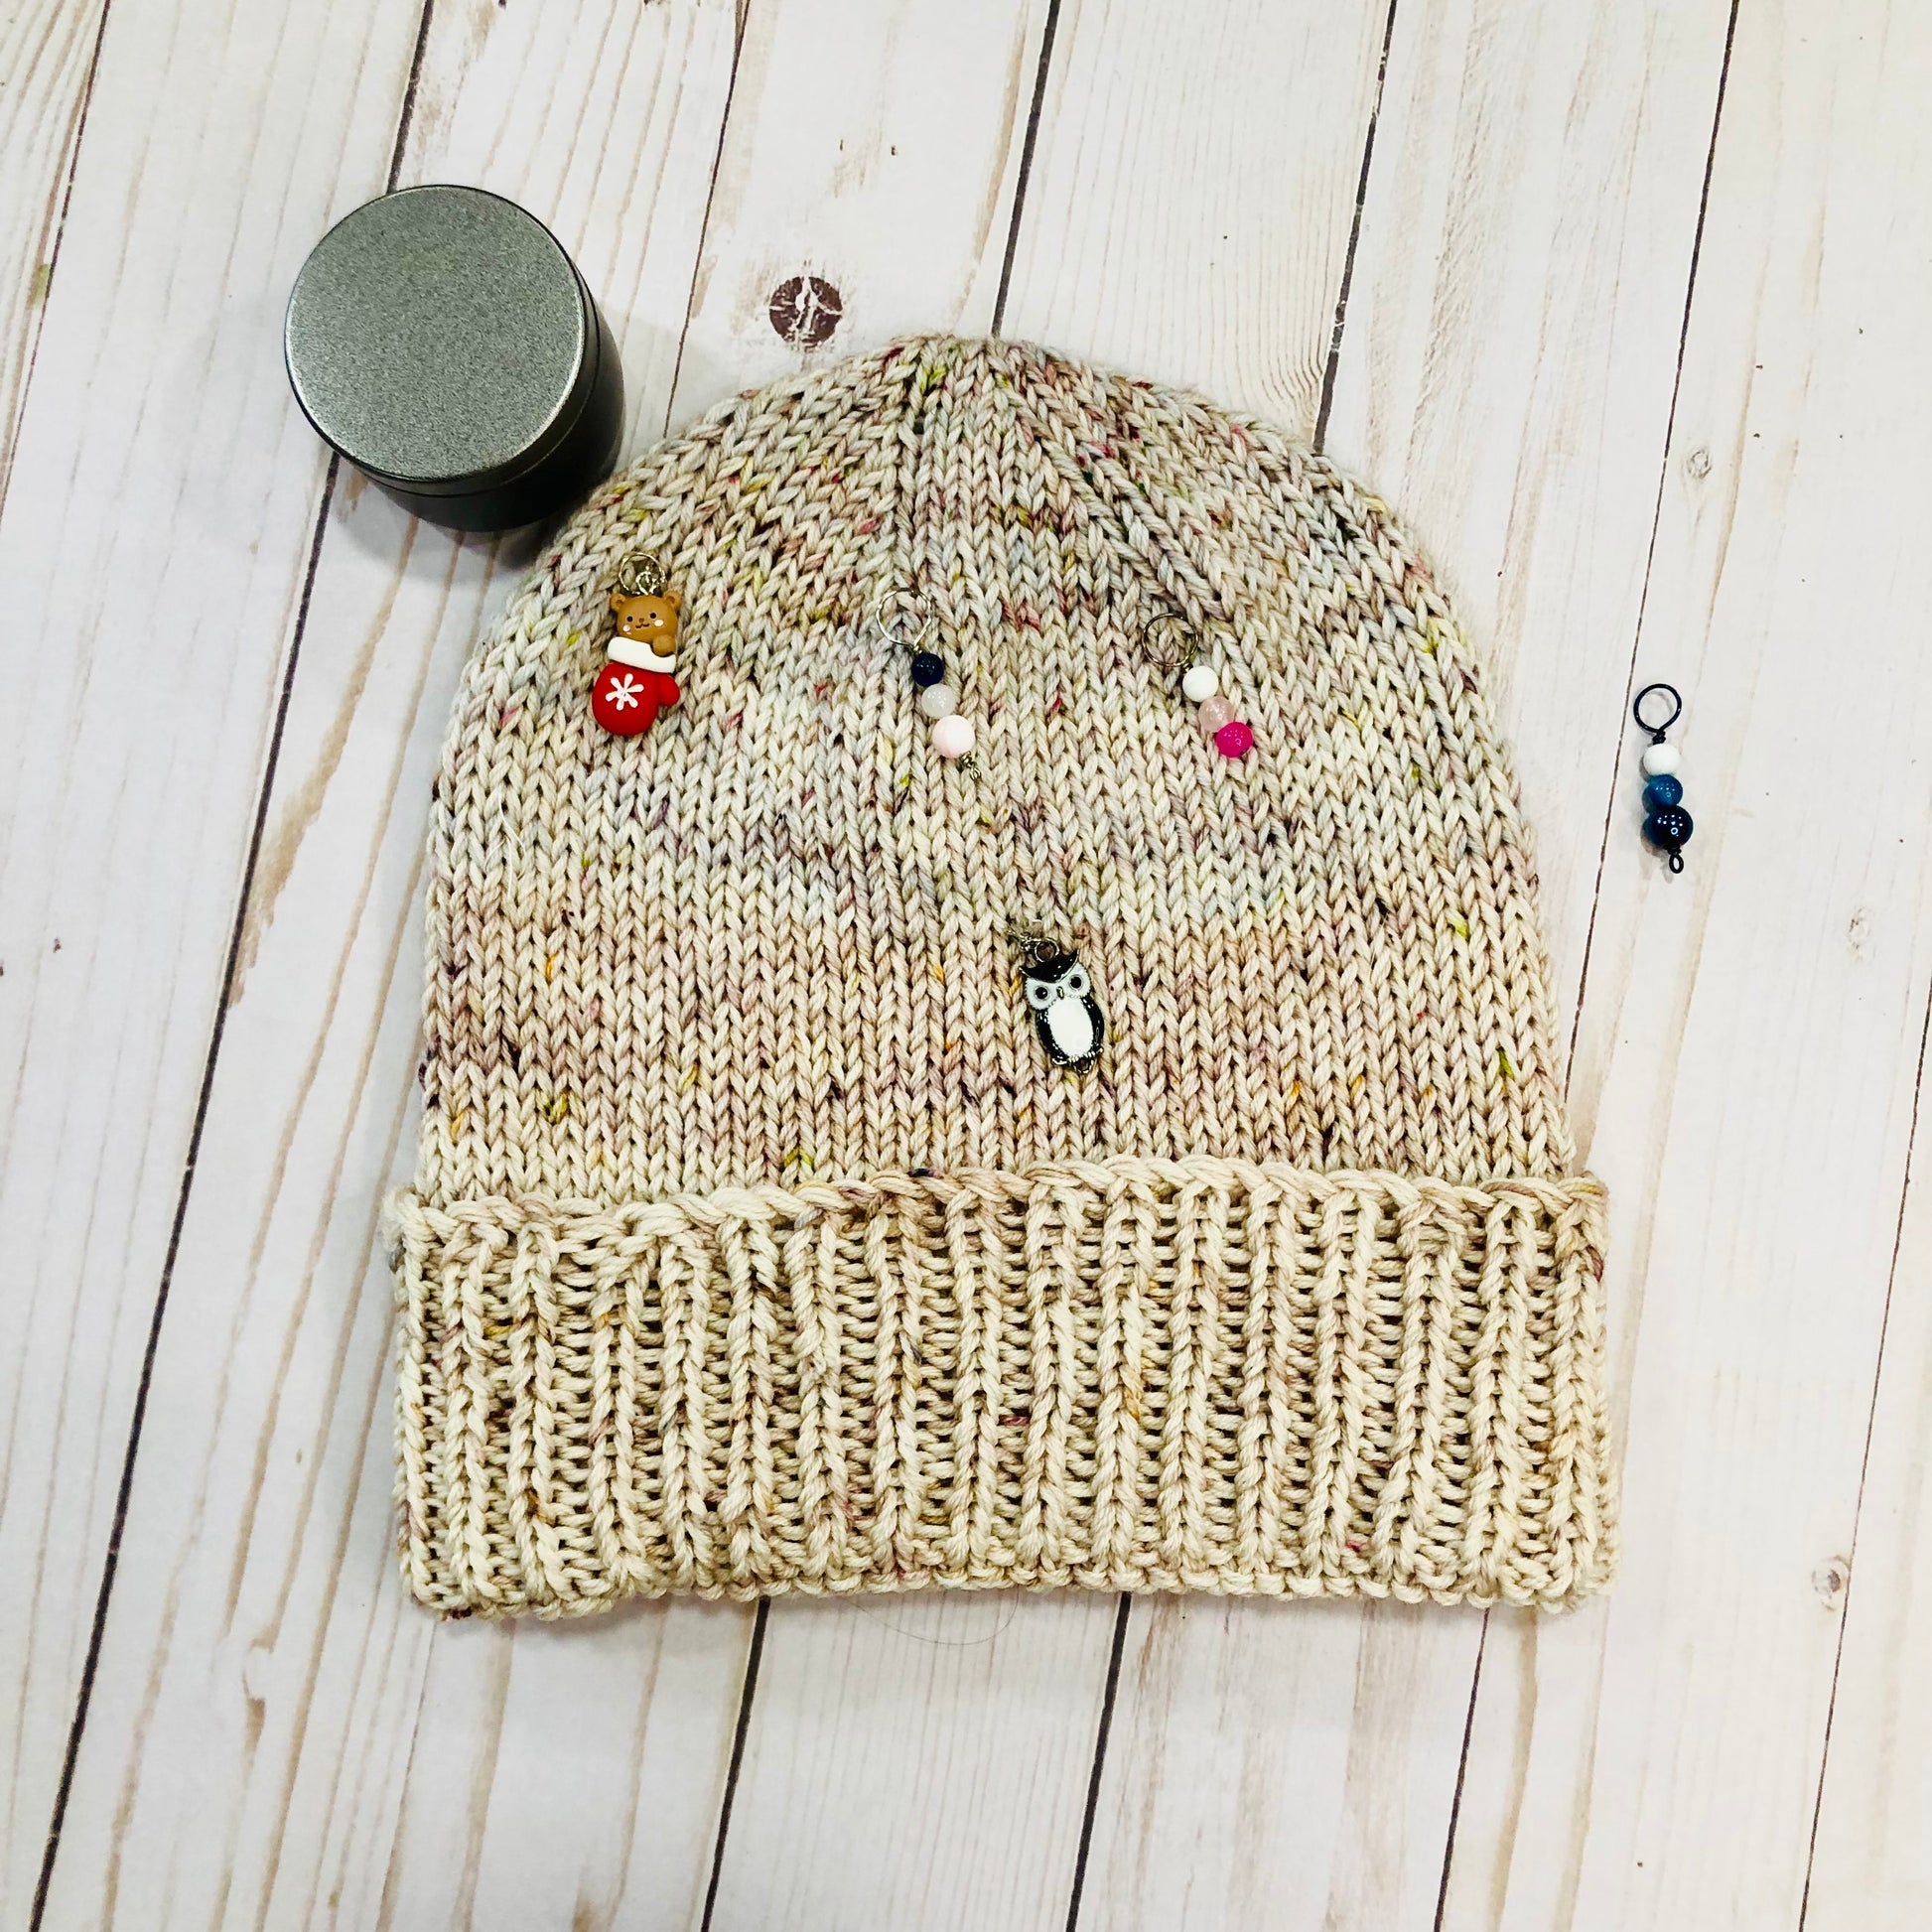 Super Duper Quick Hat Knitting Pattern by Sierra and Pine